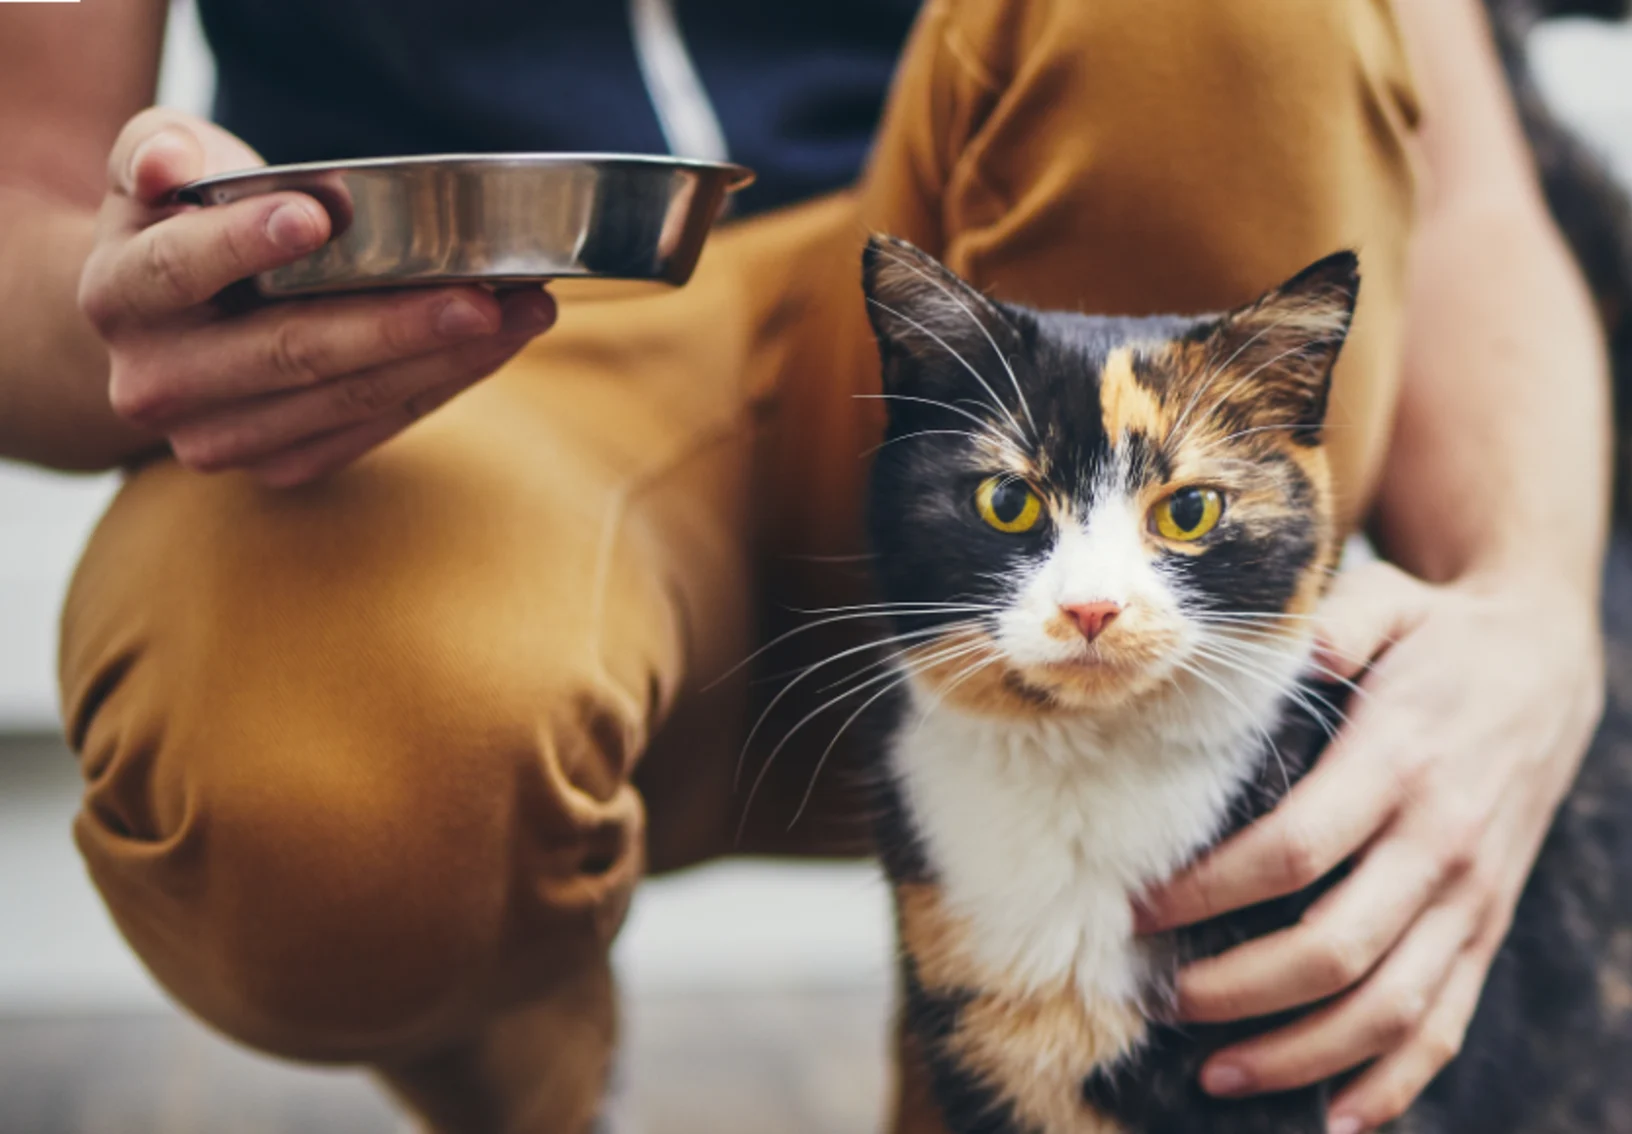 A person offering food to a cat